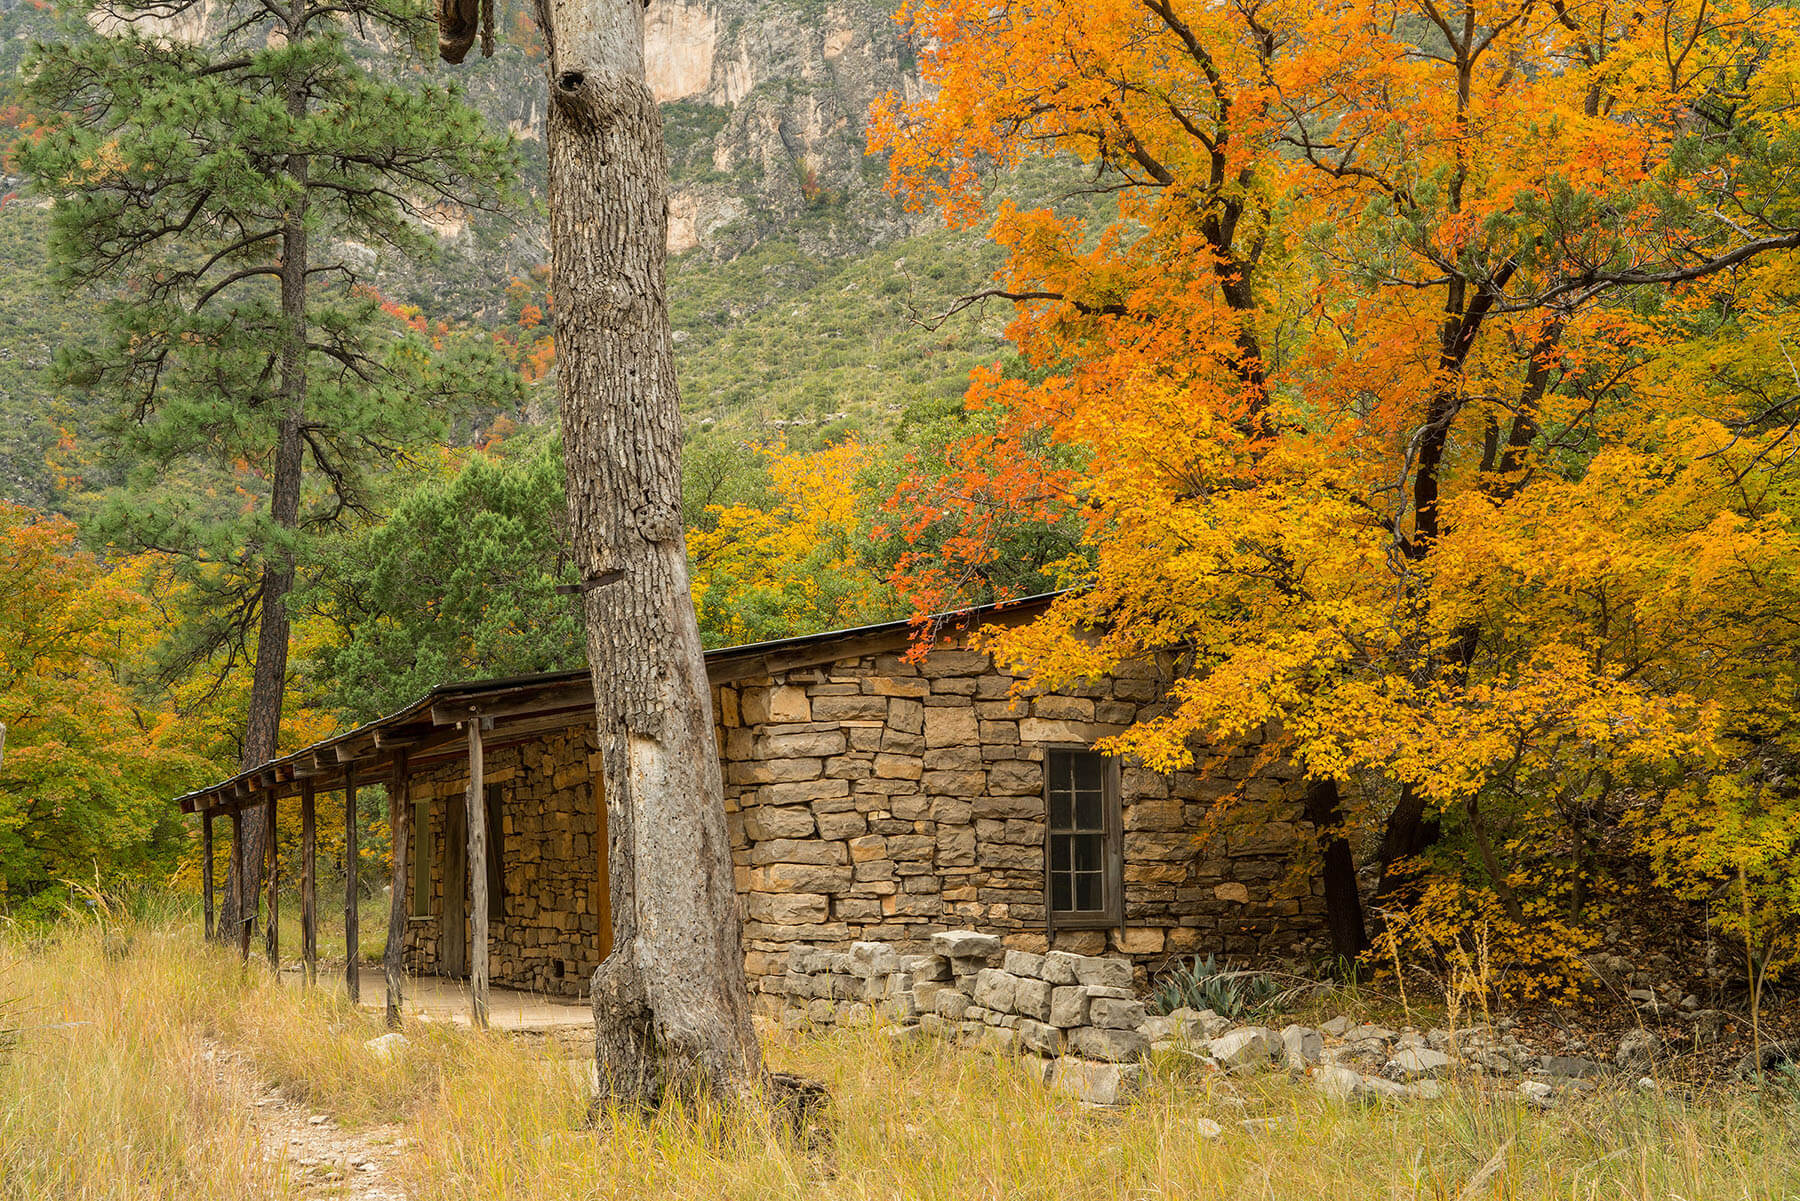 A photo of a stone house with brightly colored trees nearby in front of a sheer rock face